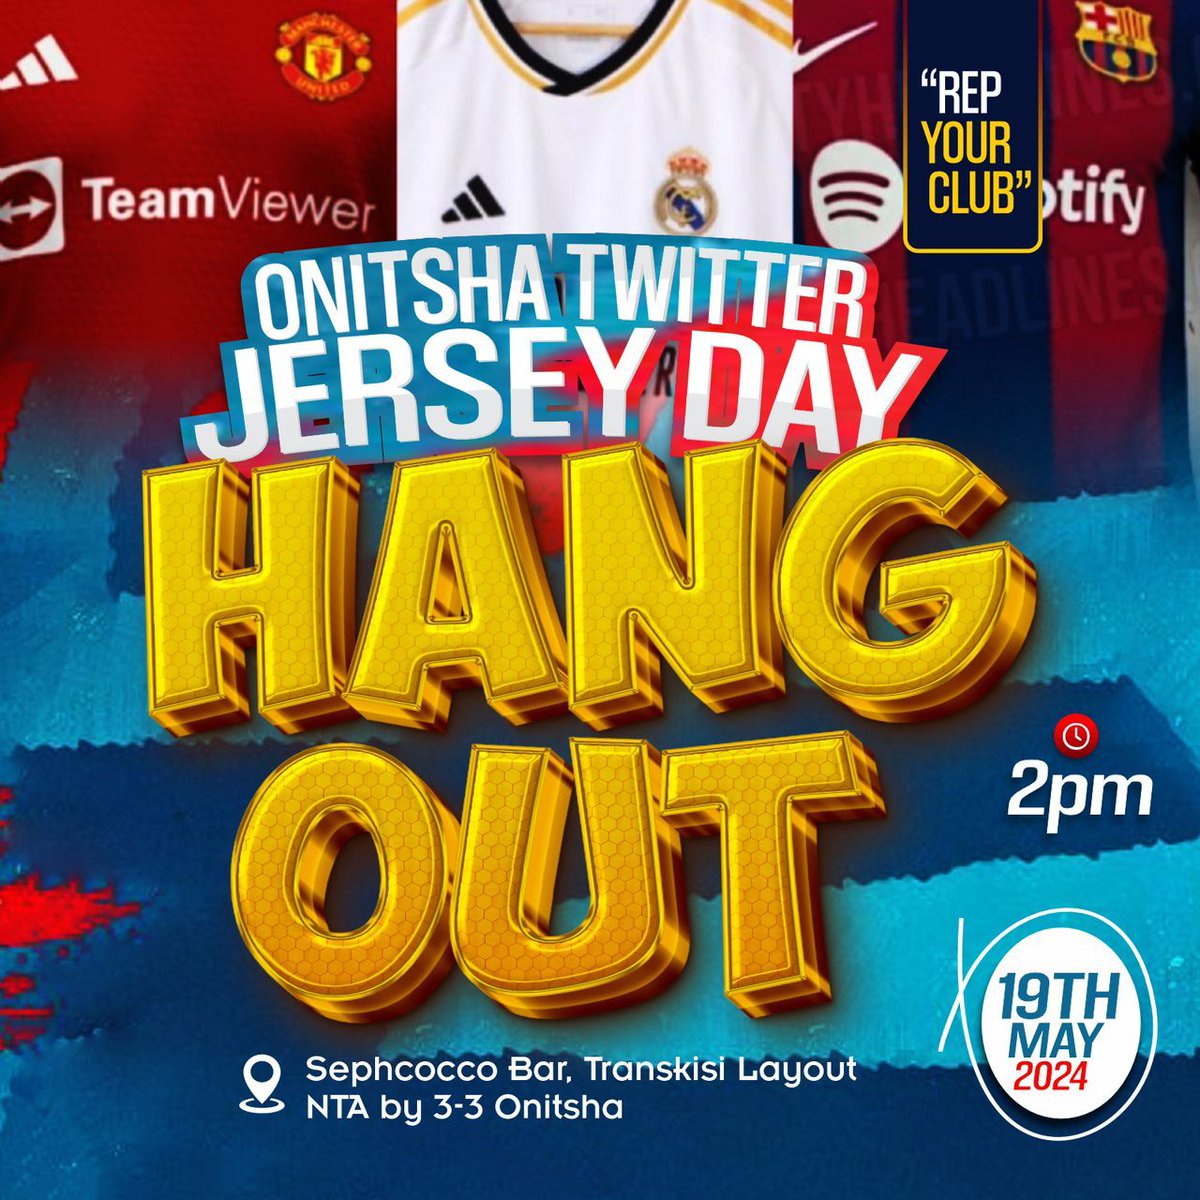 I pity Arsenal. Two years being at their best, but Guardiola says NO!!!! 😂
Sorry 🍼 's

#RepYourClub
#OnitshaTwitterJerseyHangout
#OnitshaTwitterCommunity